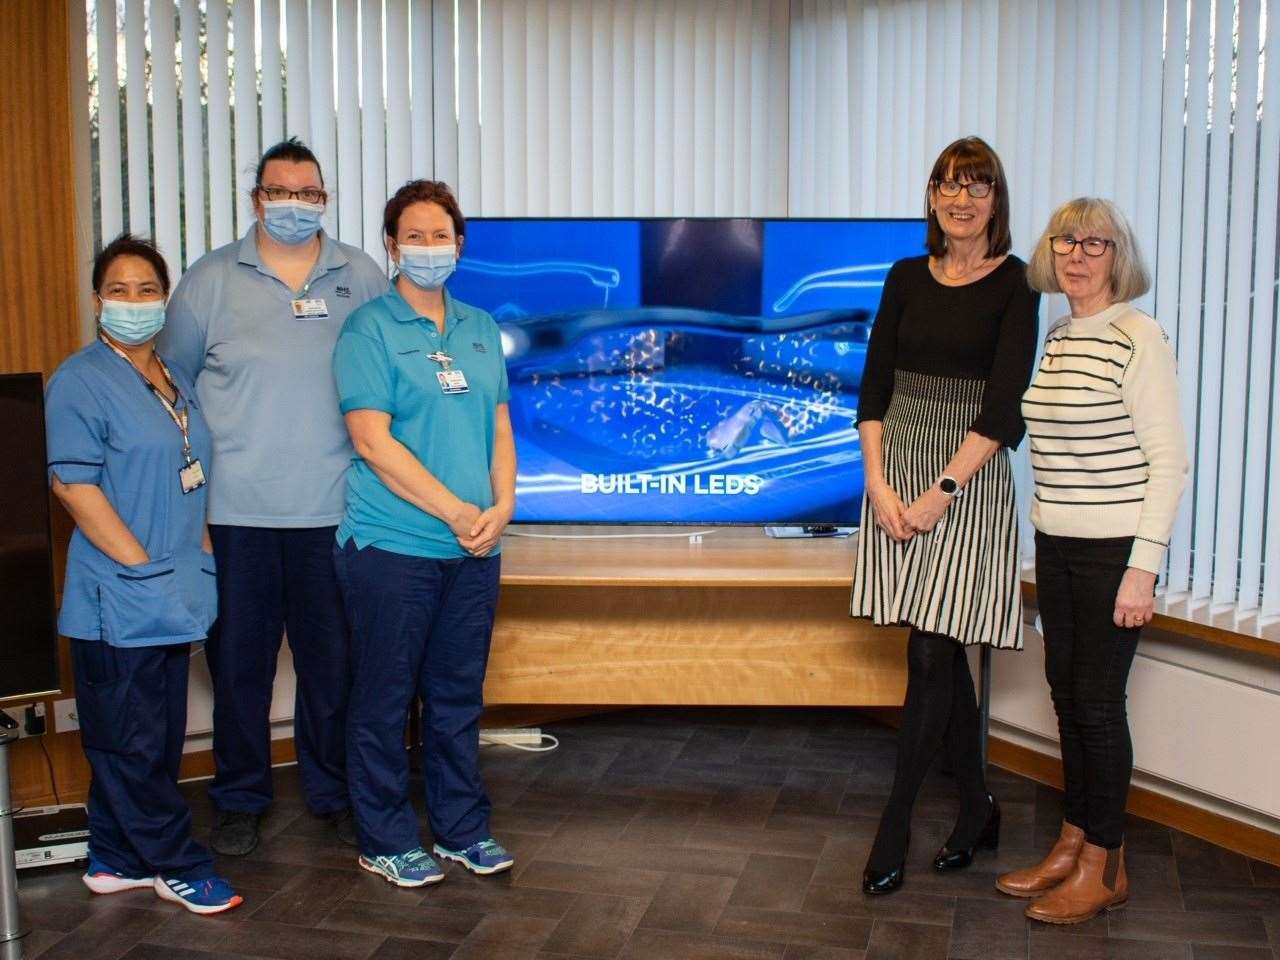 Woodend Hospital staff Nurse Esme Reys, senior healthcare support worker Nicki Mutch, senior physiotherapist Catriona Reid, and George’s sisters Ishbel Munro and Audrey Stewart with the flatscreen TV from the donation.